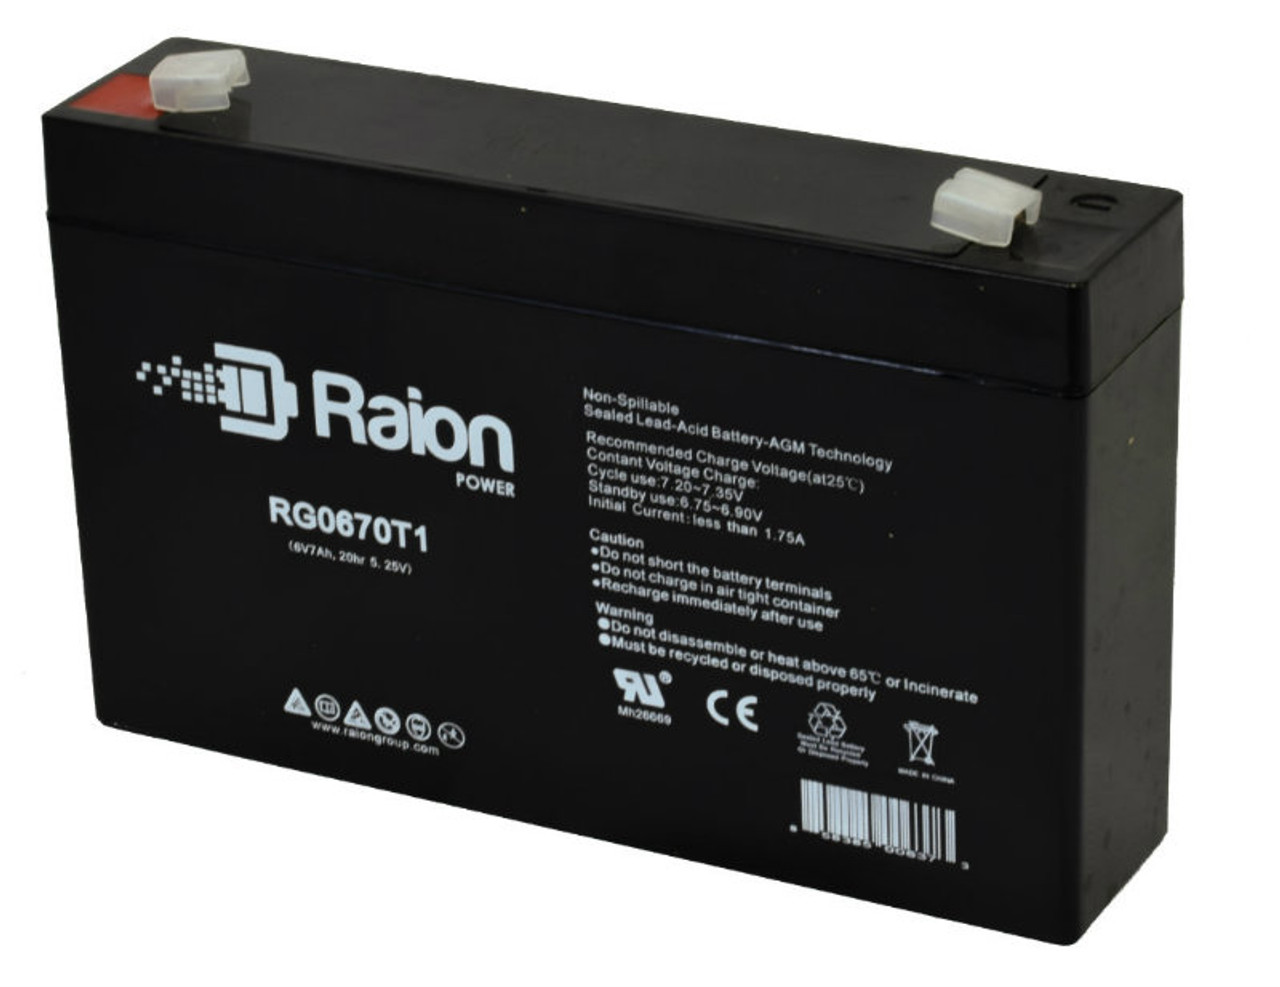 Raion Power RG0670T1 6V 7Ah Replacement Battery Cartridge for FirstPower FP670